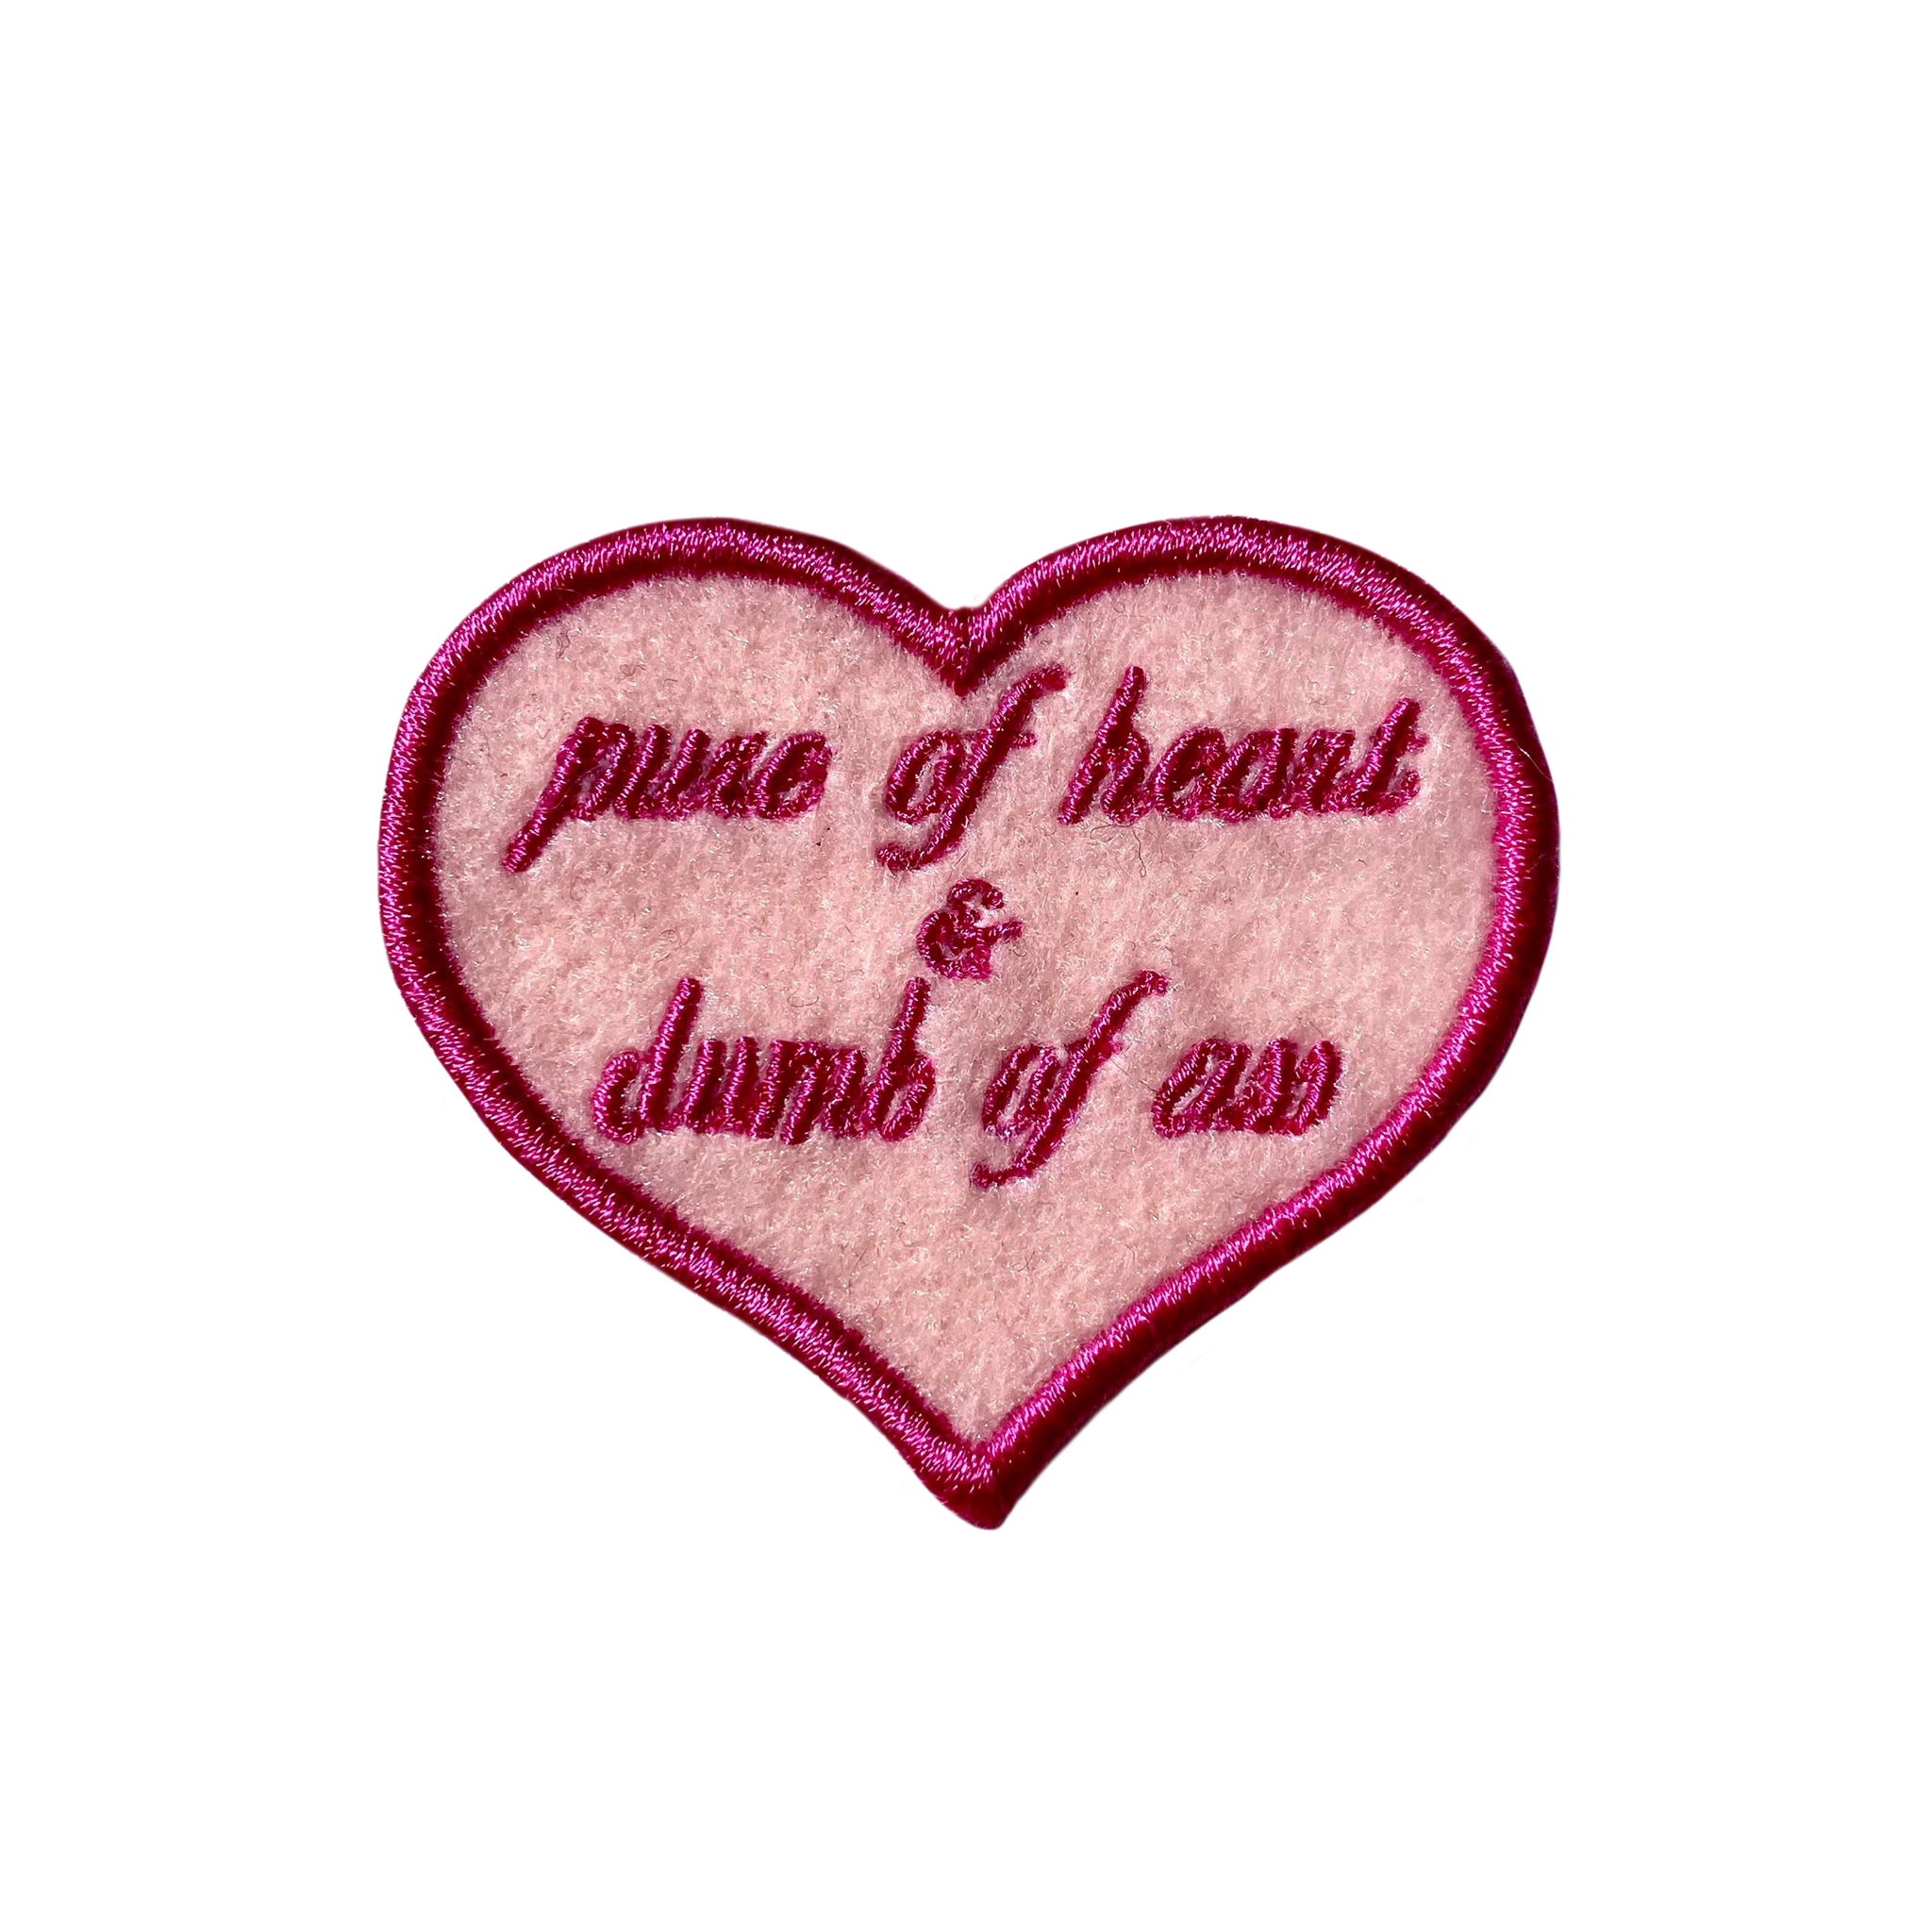 Pure of Heart & Dumb of Ass Embroidered Iron-on Patch - IncredibleGood Inc